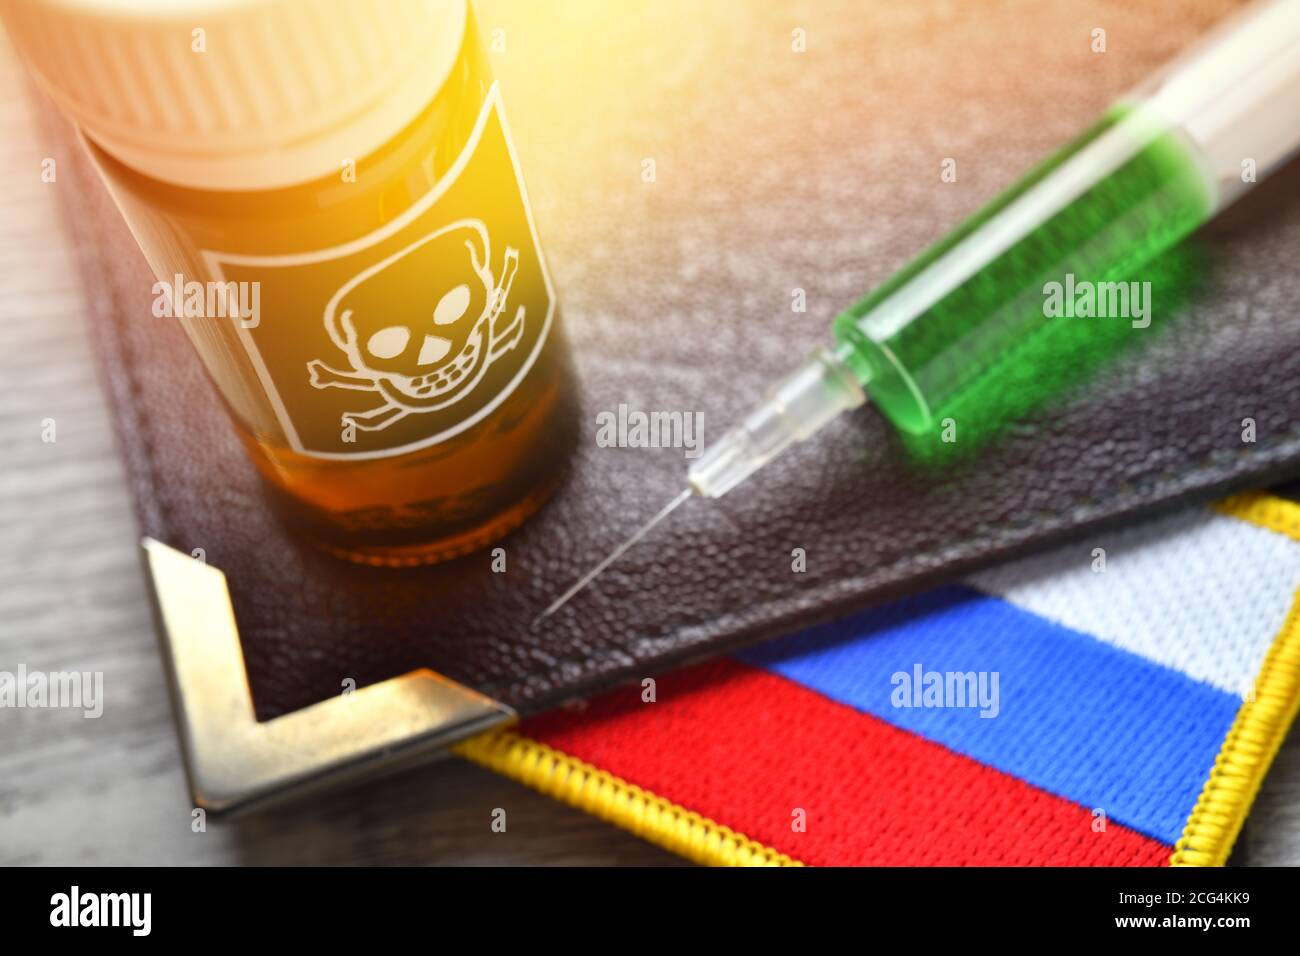 Syringe, poison vial and Russian flag, poison attack Stock Photo